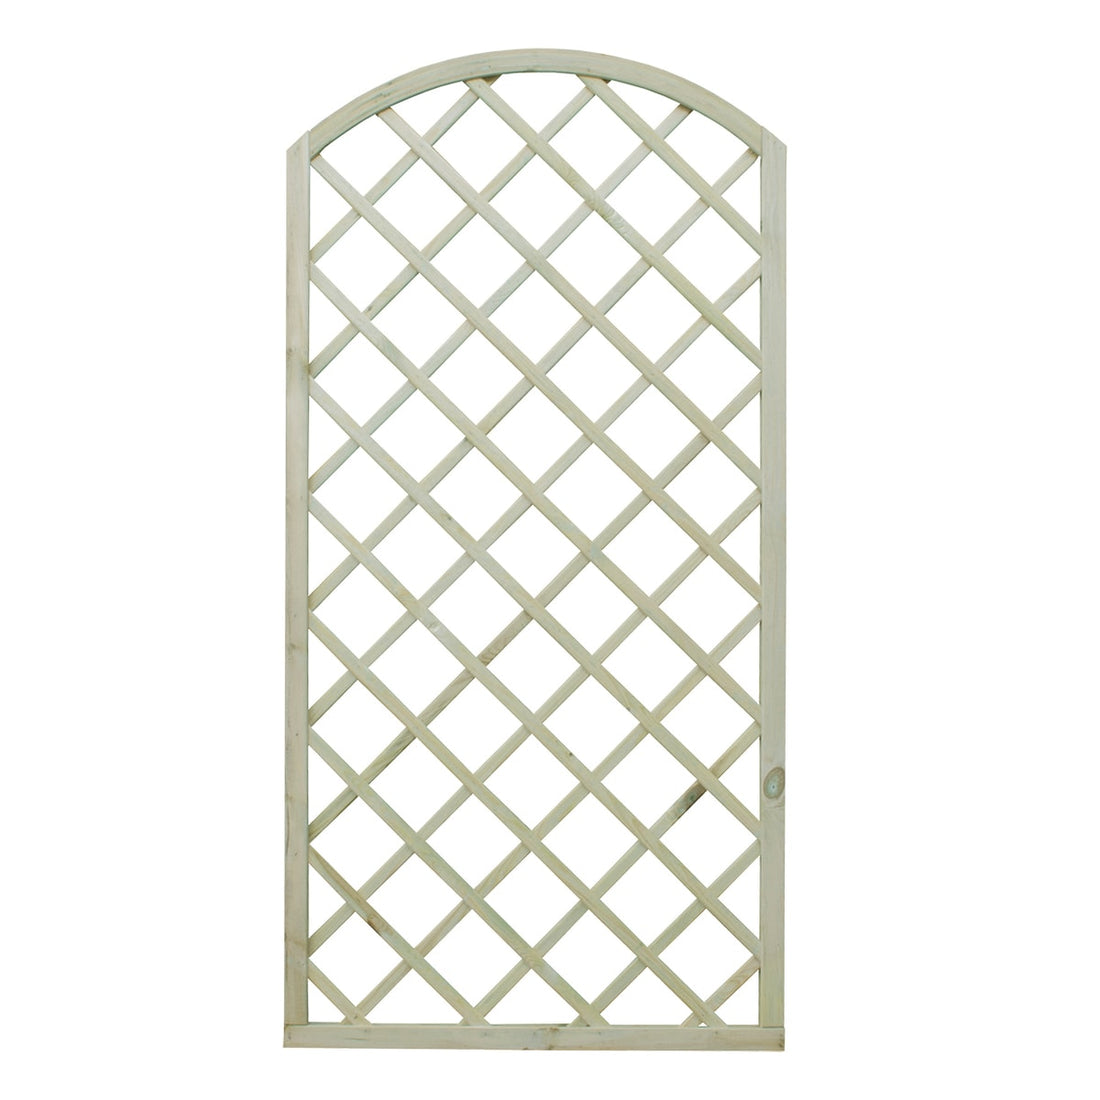 DIAGO ARCH GRATING 90 X 180 CM IN AUTOCLAVE-TREATED PINE WOOD